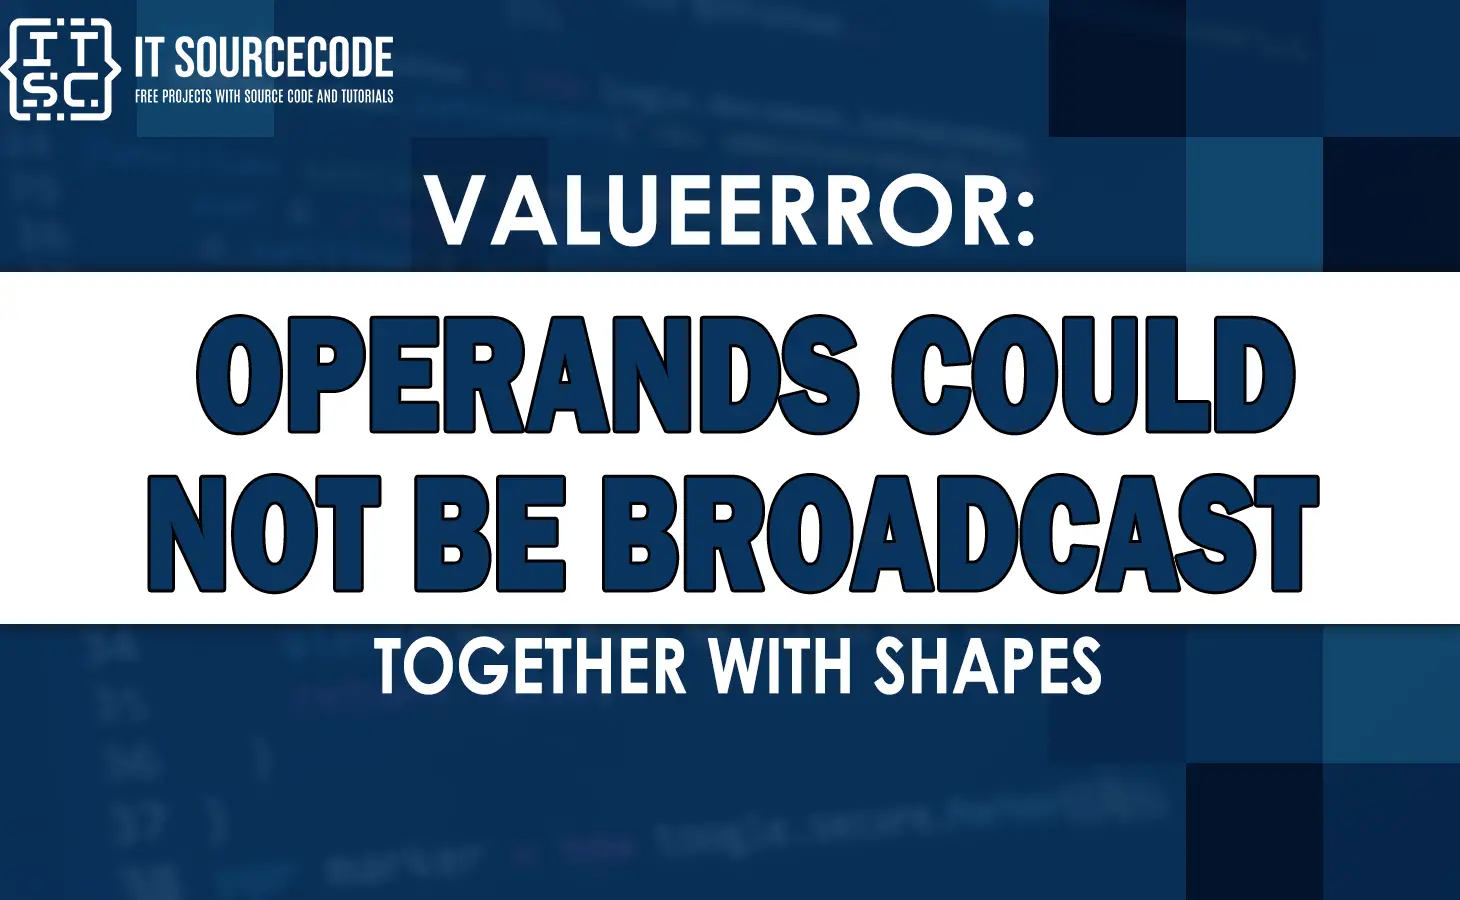 Valueerror operands could not be broadcast together with shapes